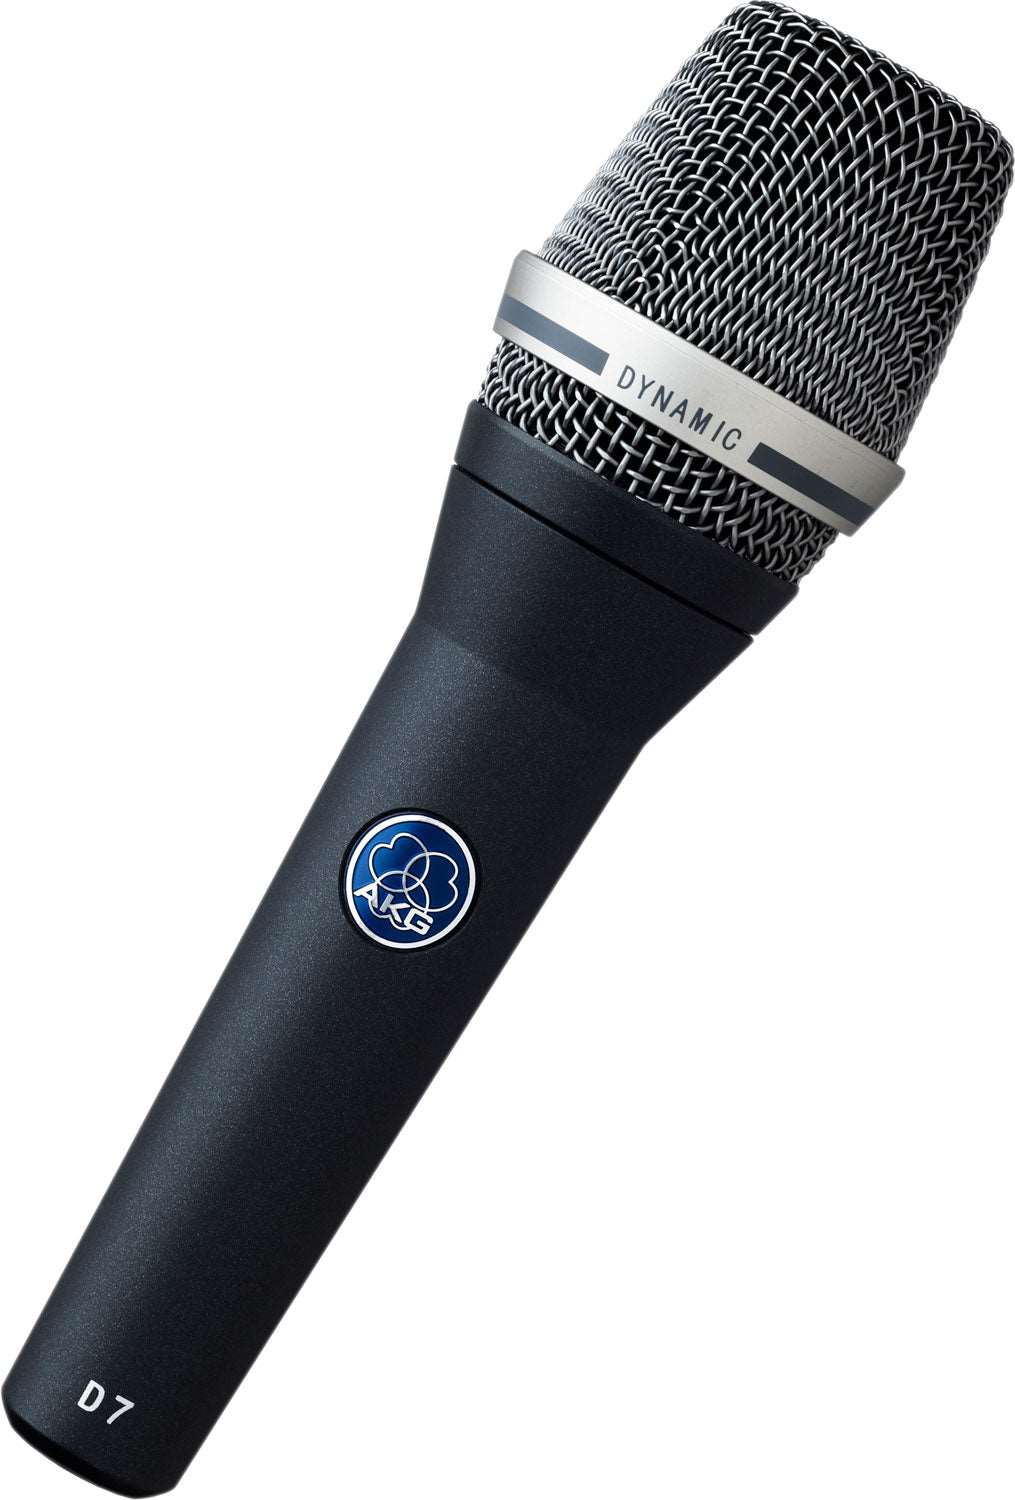 AKG D7 Reference dynamic vocal microphone - Aron Soitin